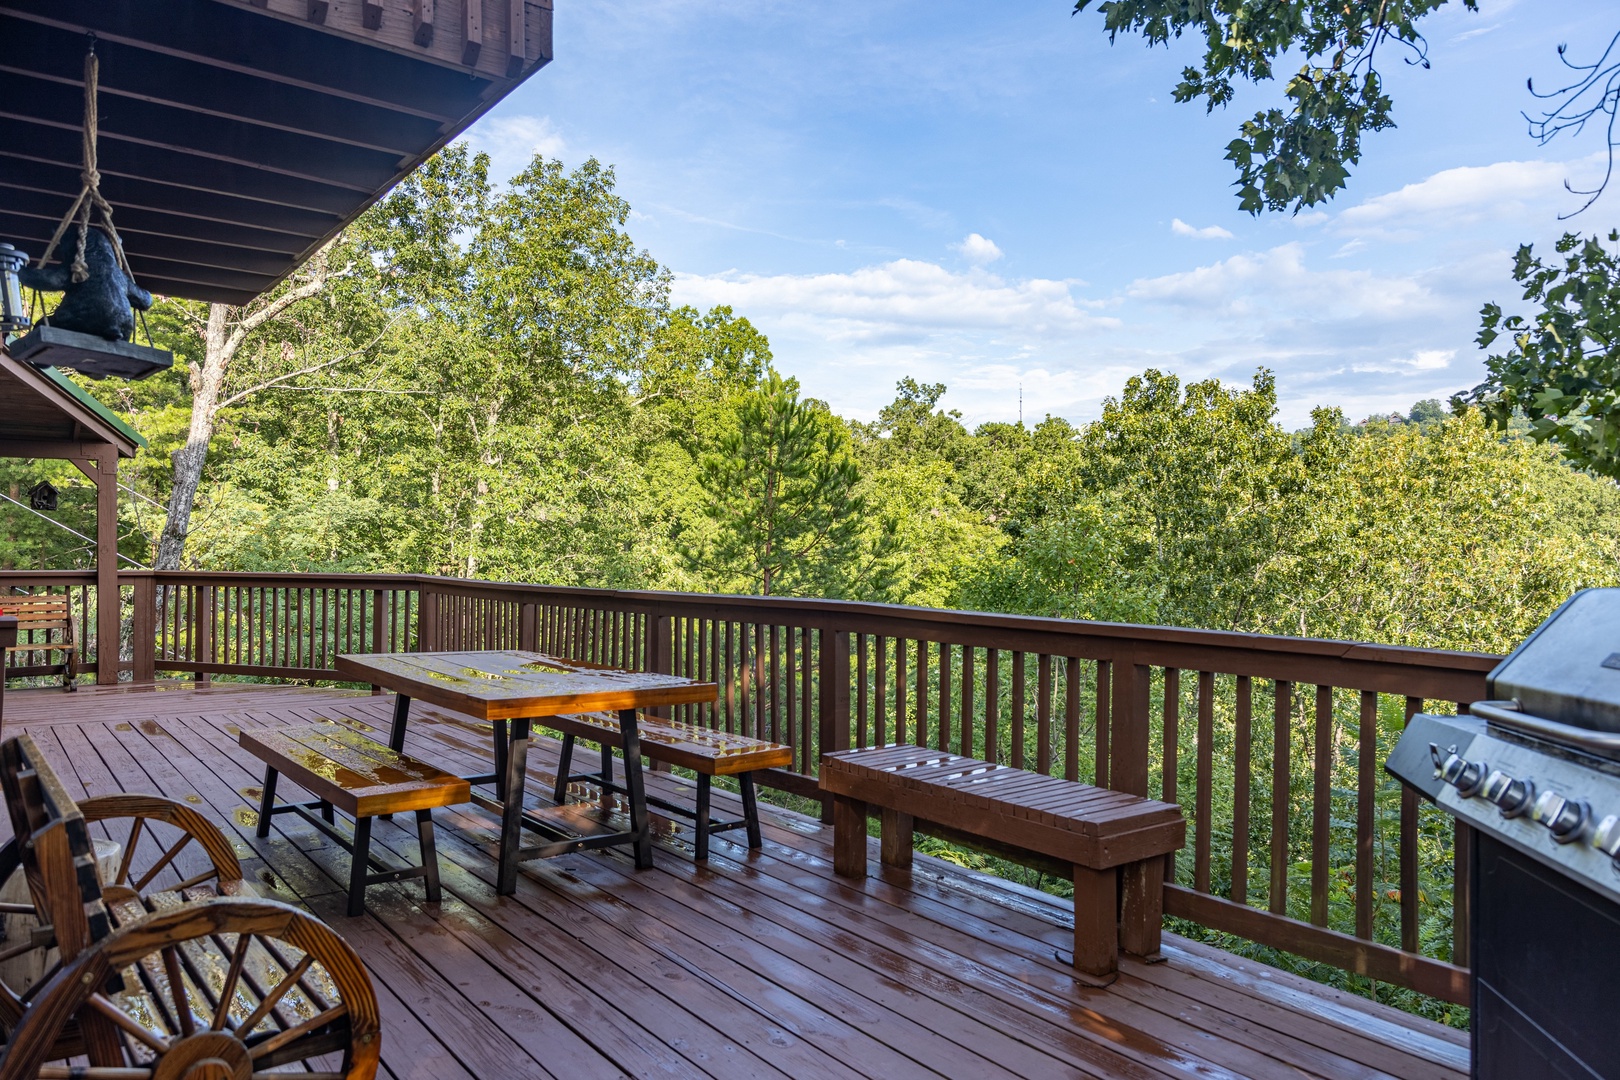 Deck dining area with a gas grill at Bearing Views, a 3 bedroom cabin rental located in Pigeon Forge